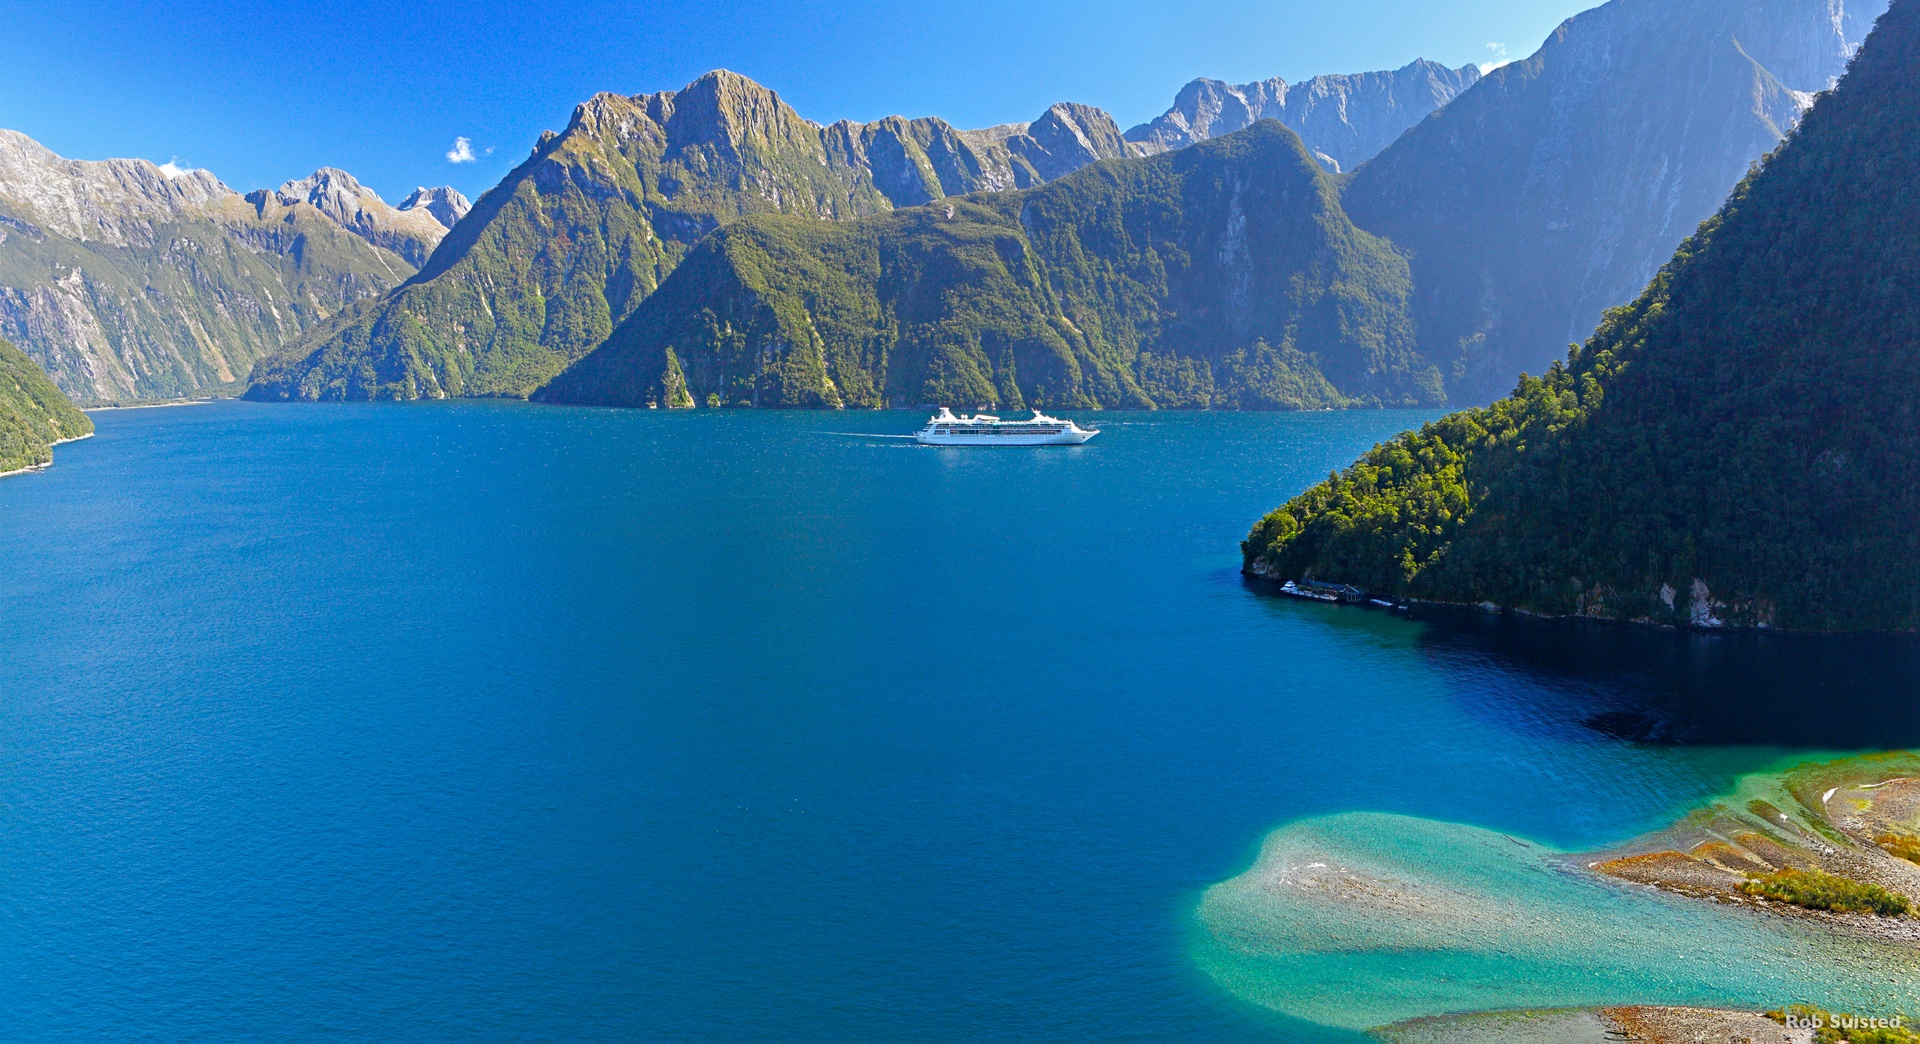 Five reasons to take a scenic flight in Fiordland